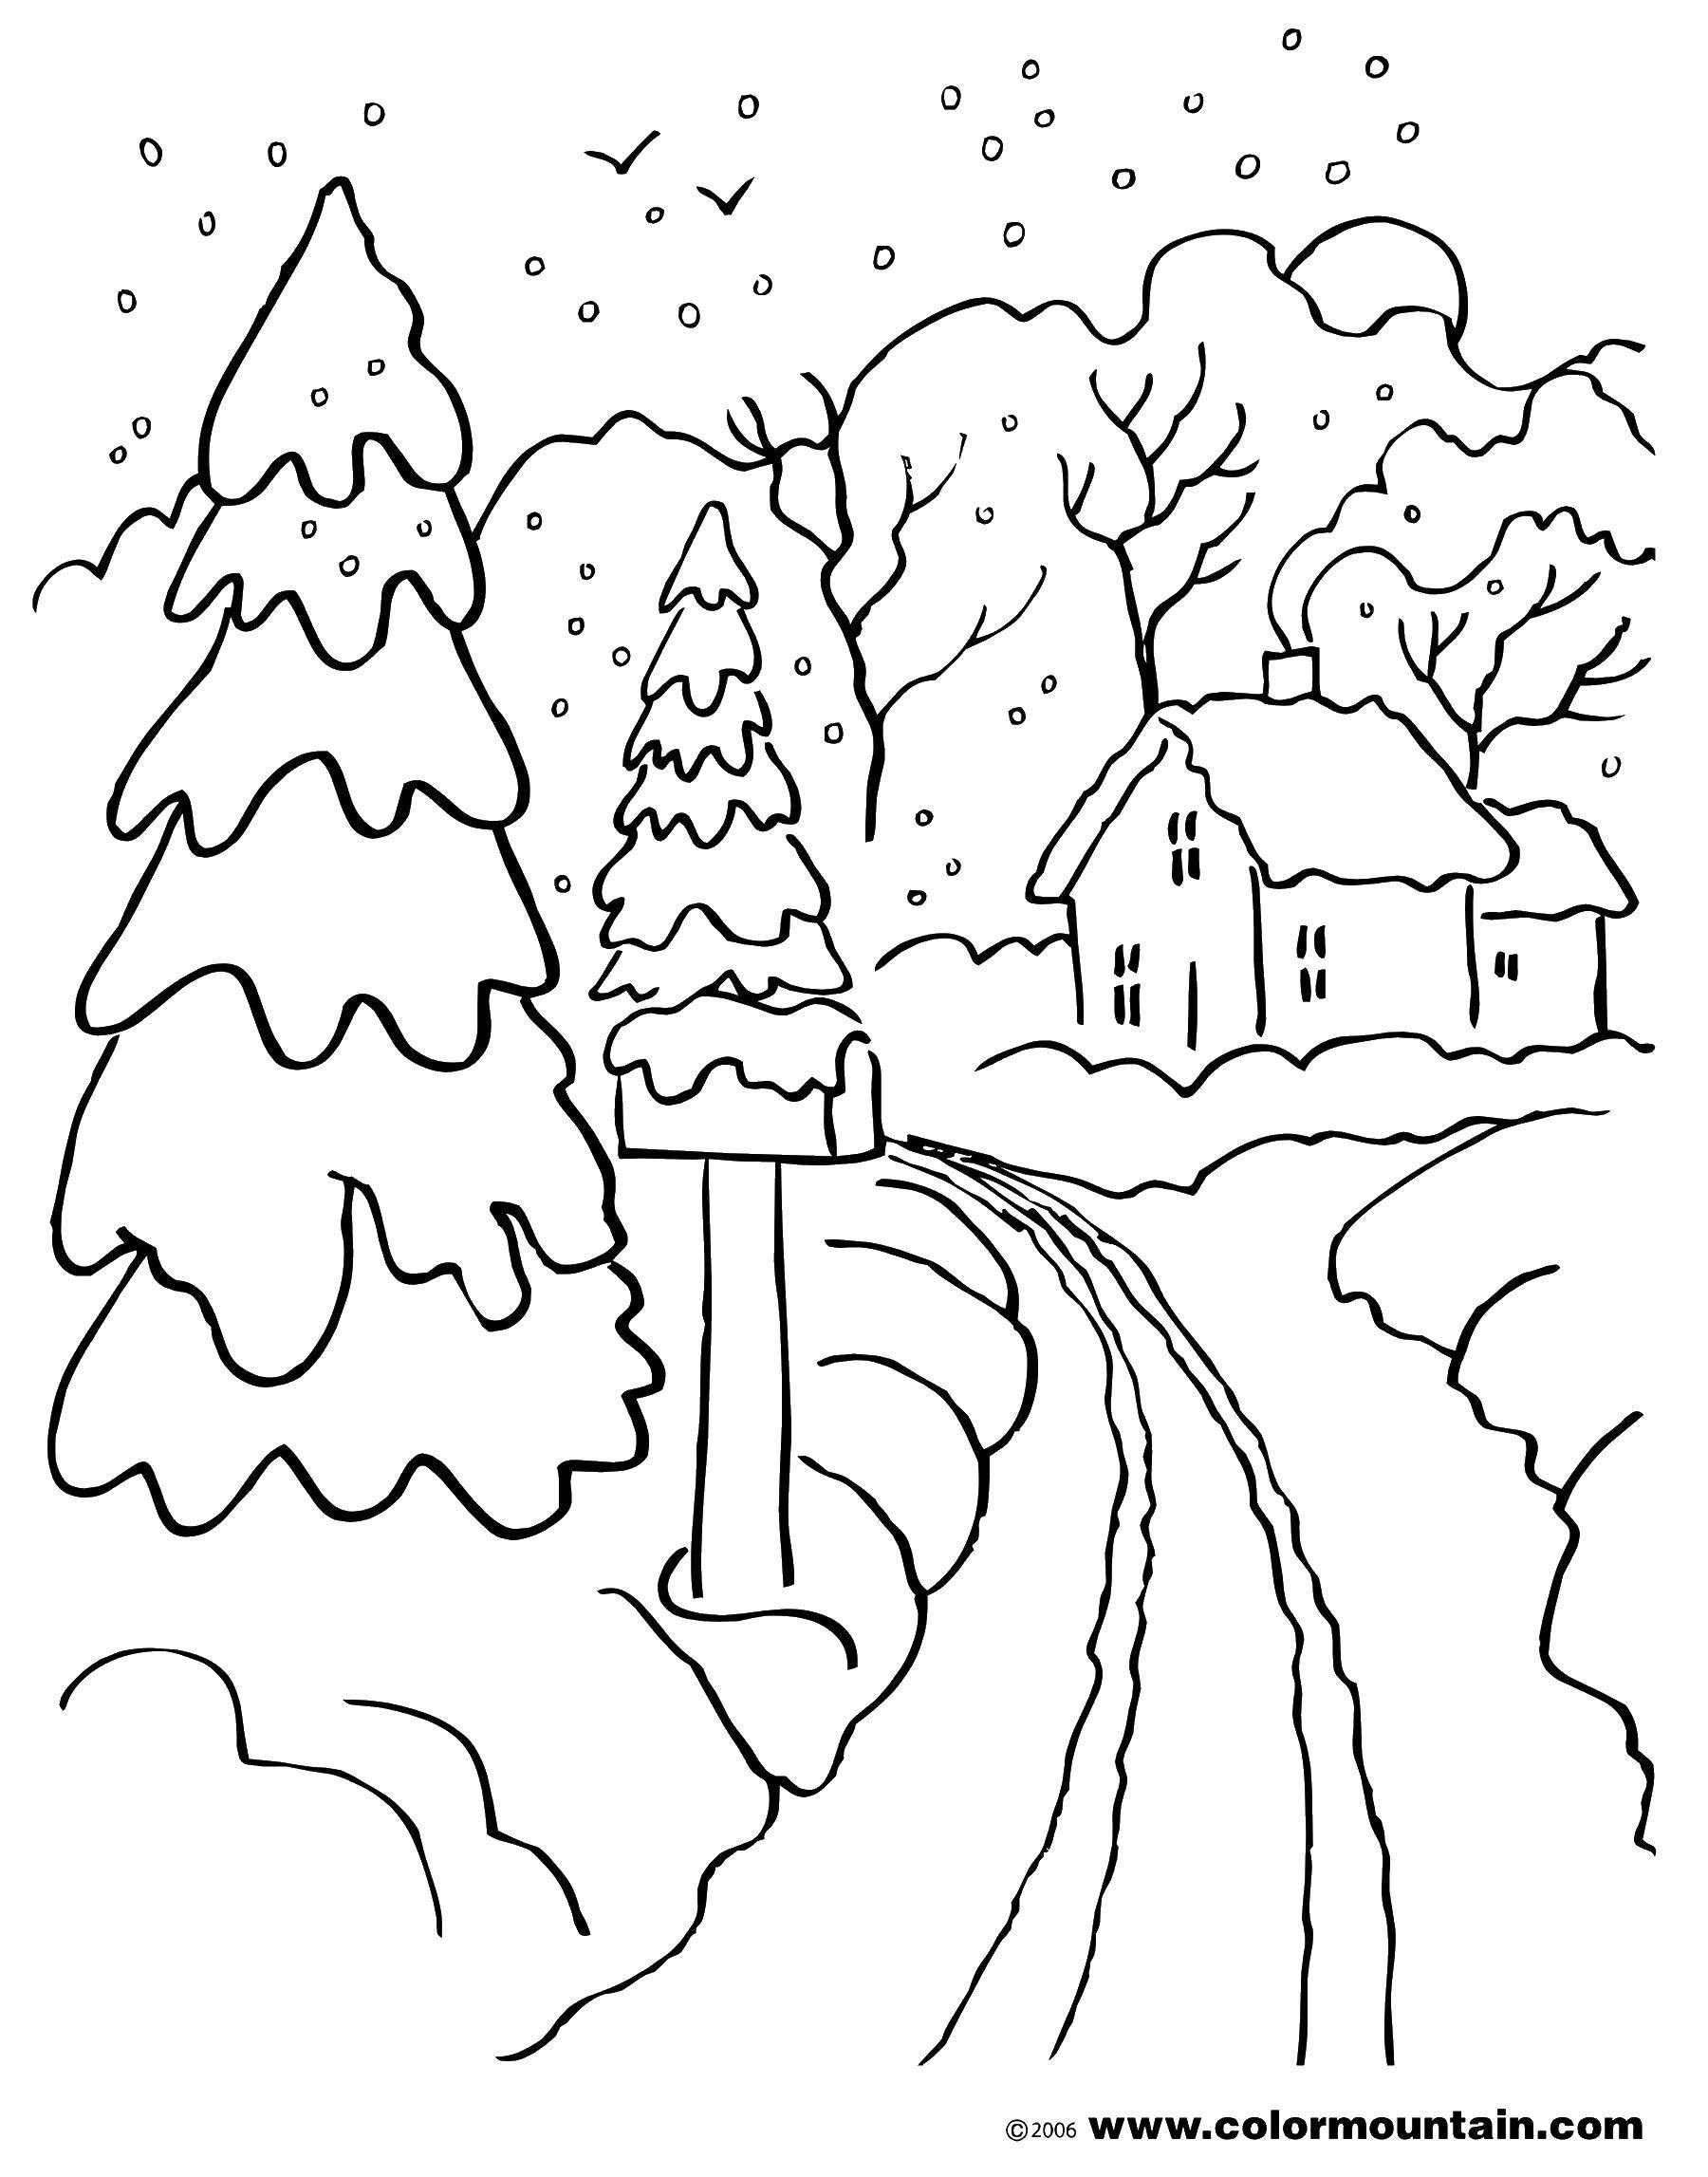 Coloring Snowfall in the town. Category coloring. Tags:  snowfall, shag, houses.